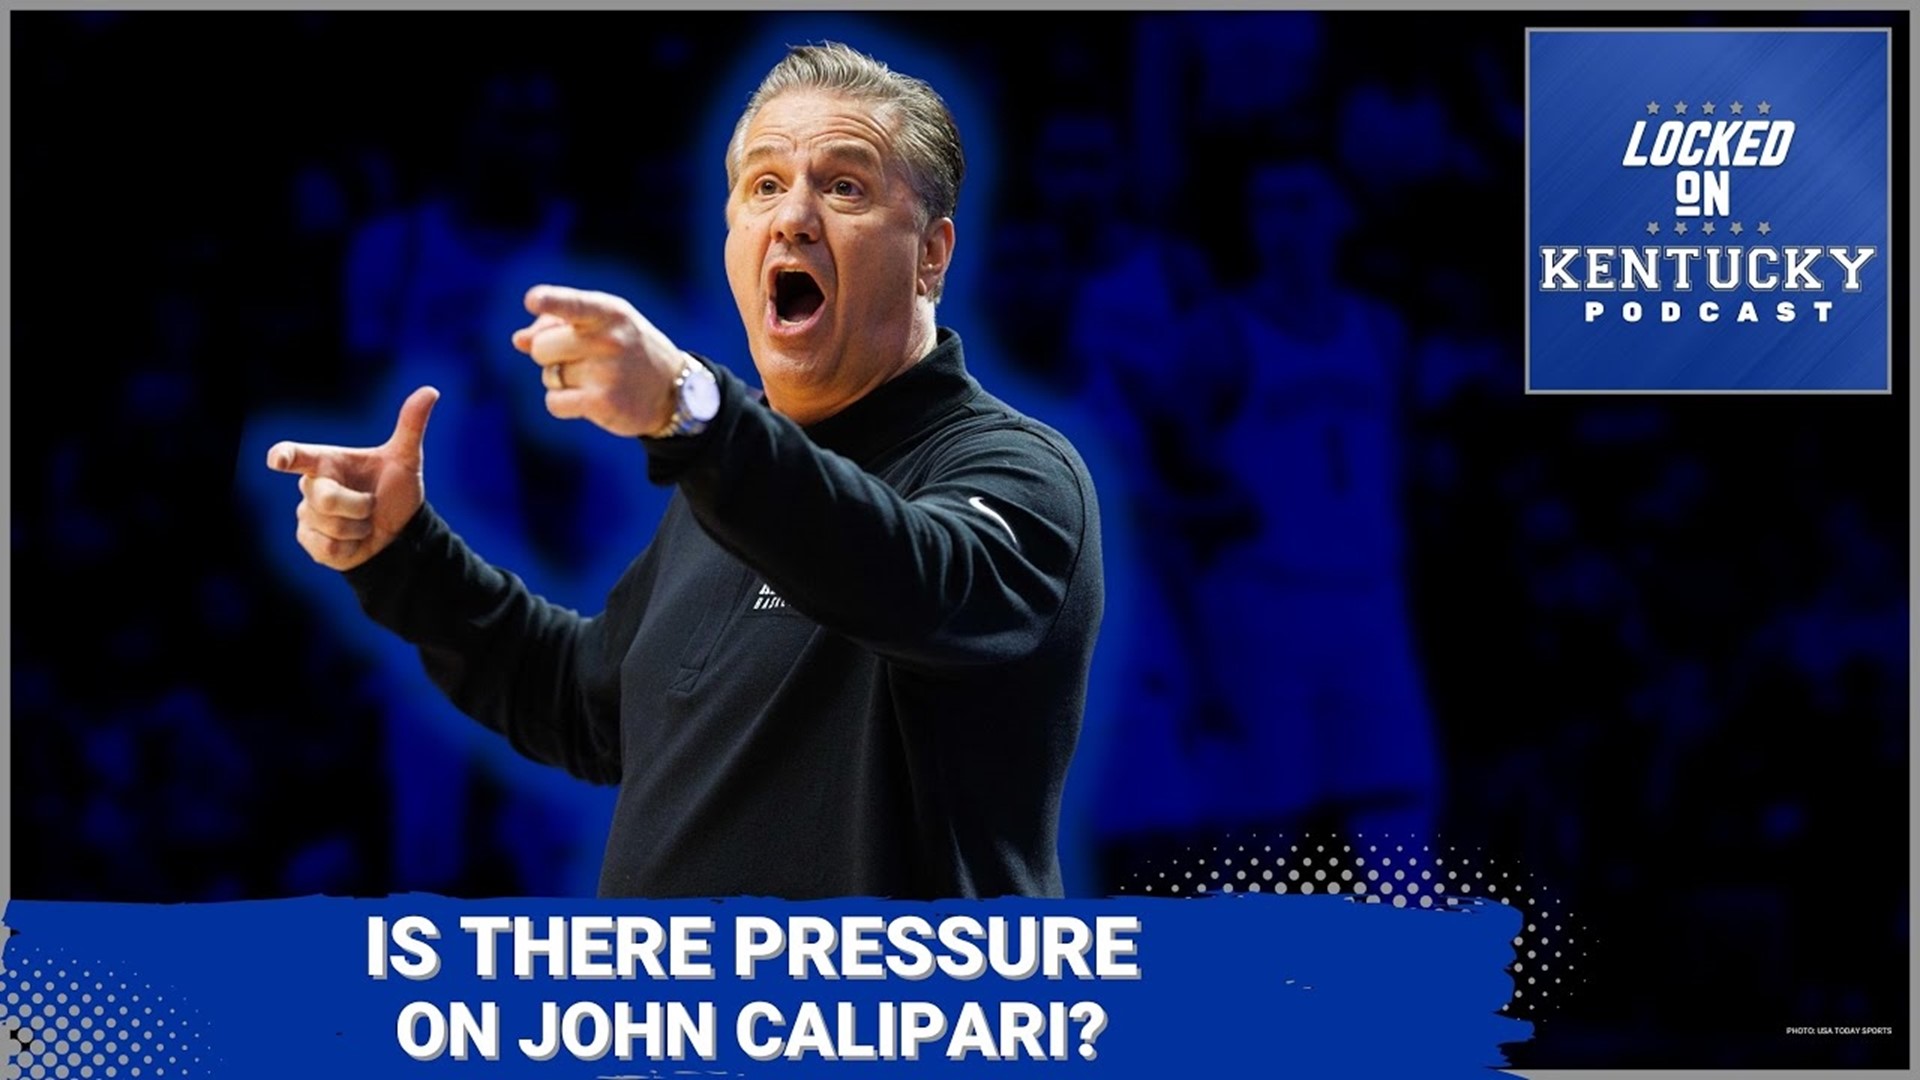 How much pressure is there on John Calipari to take Kentucky basketball on another deep run in March Madness?